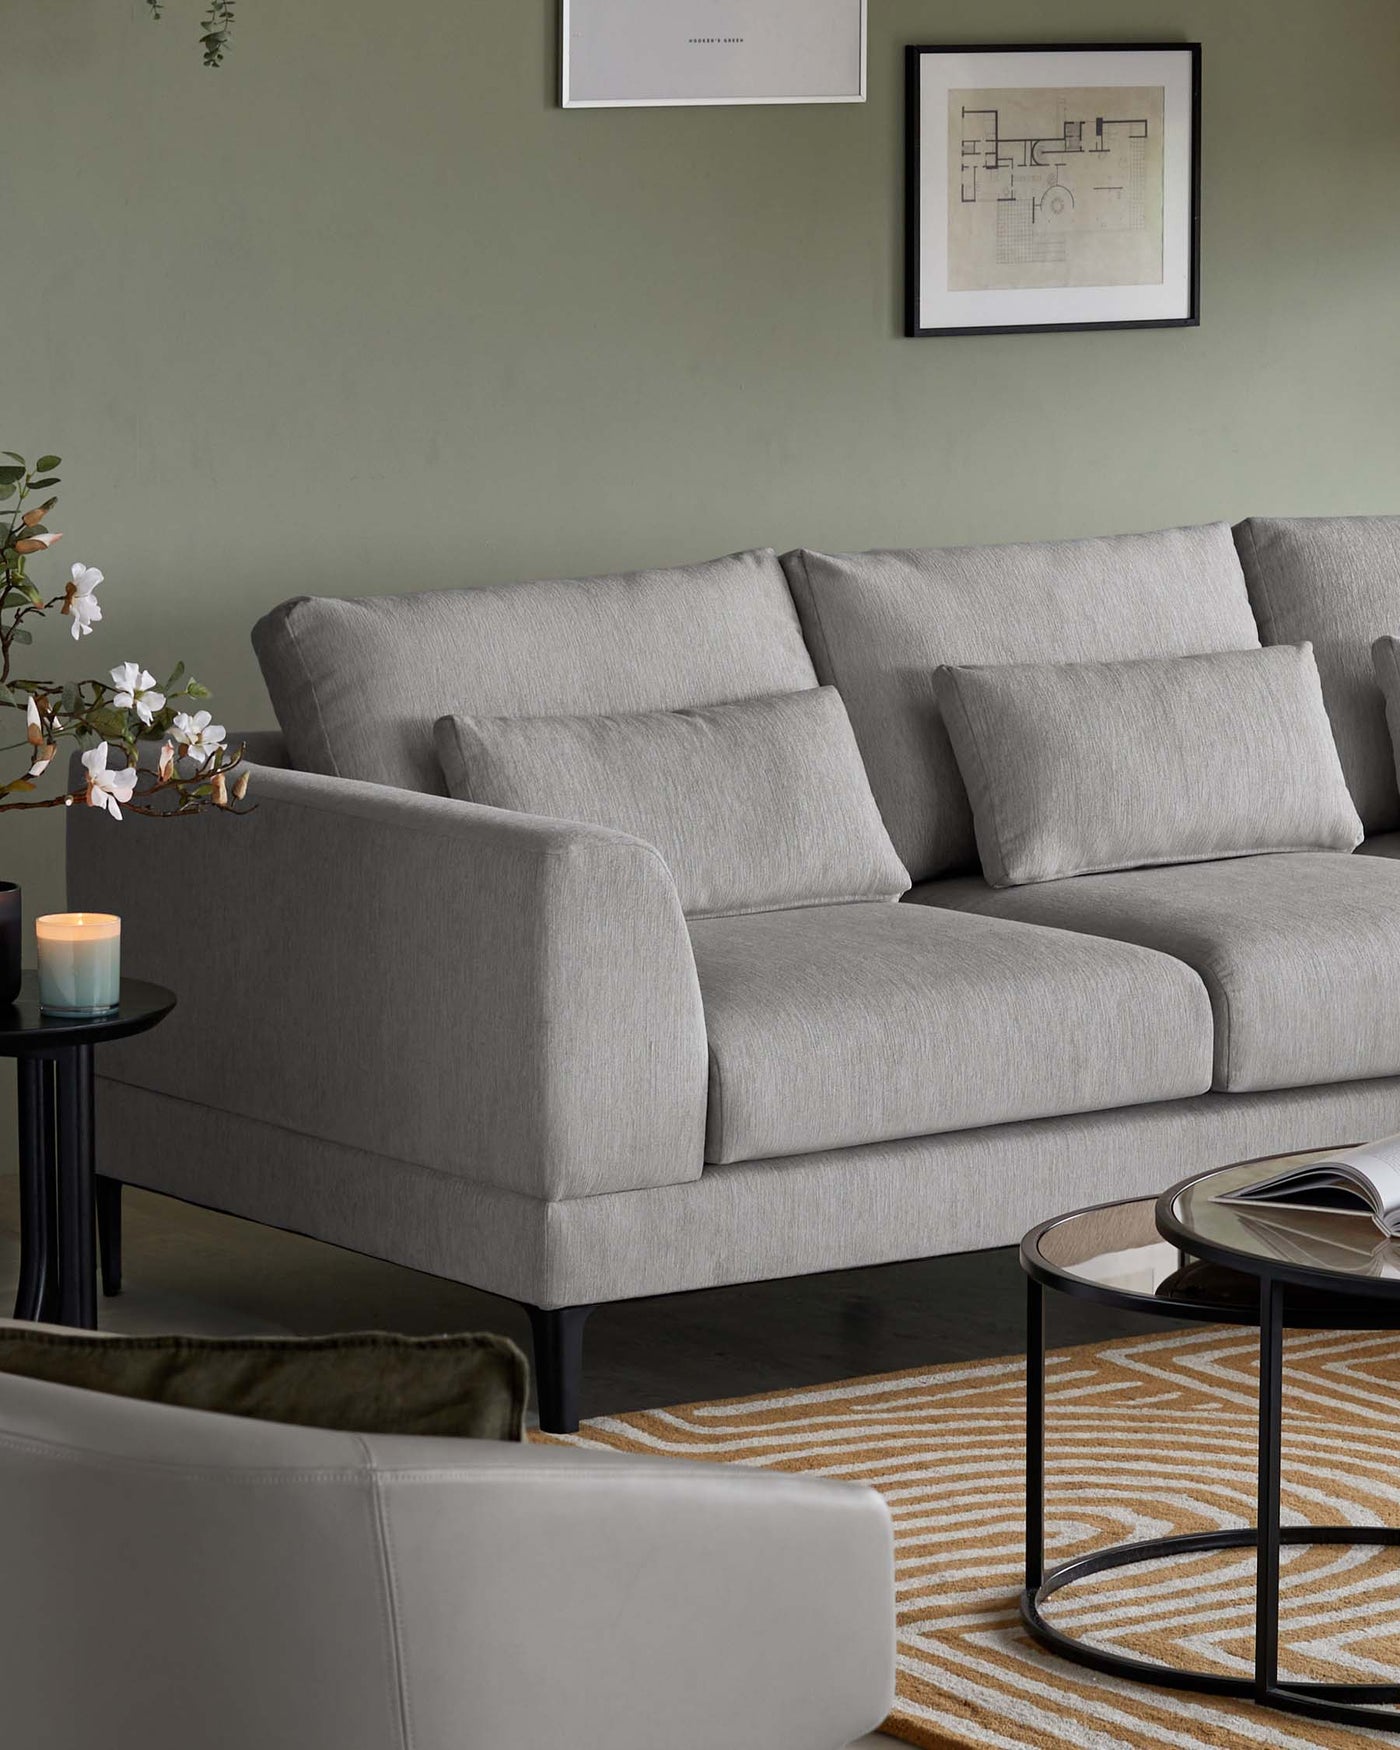 A contemporary three-seater sofa with a light grey fabric upholstery and plush back cushions. The sofa features a simple, streamlined silhouette with rounded armrests and black tapered legs. In front of the sofa, there is a round black coffee table with a clear glass top and a lower shelf with a circular pattern design. The furniture is set upon a textured yellow and white striped area rug, adding a subtle touch of colour to the space.